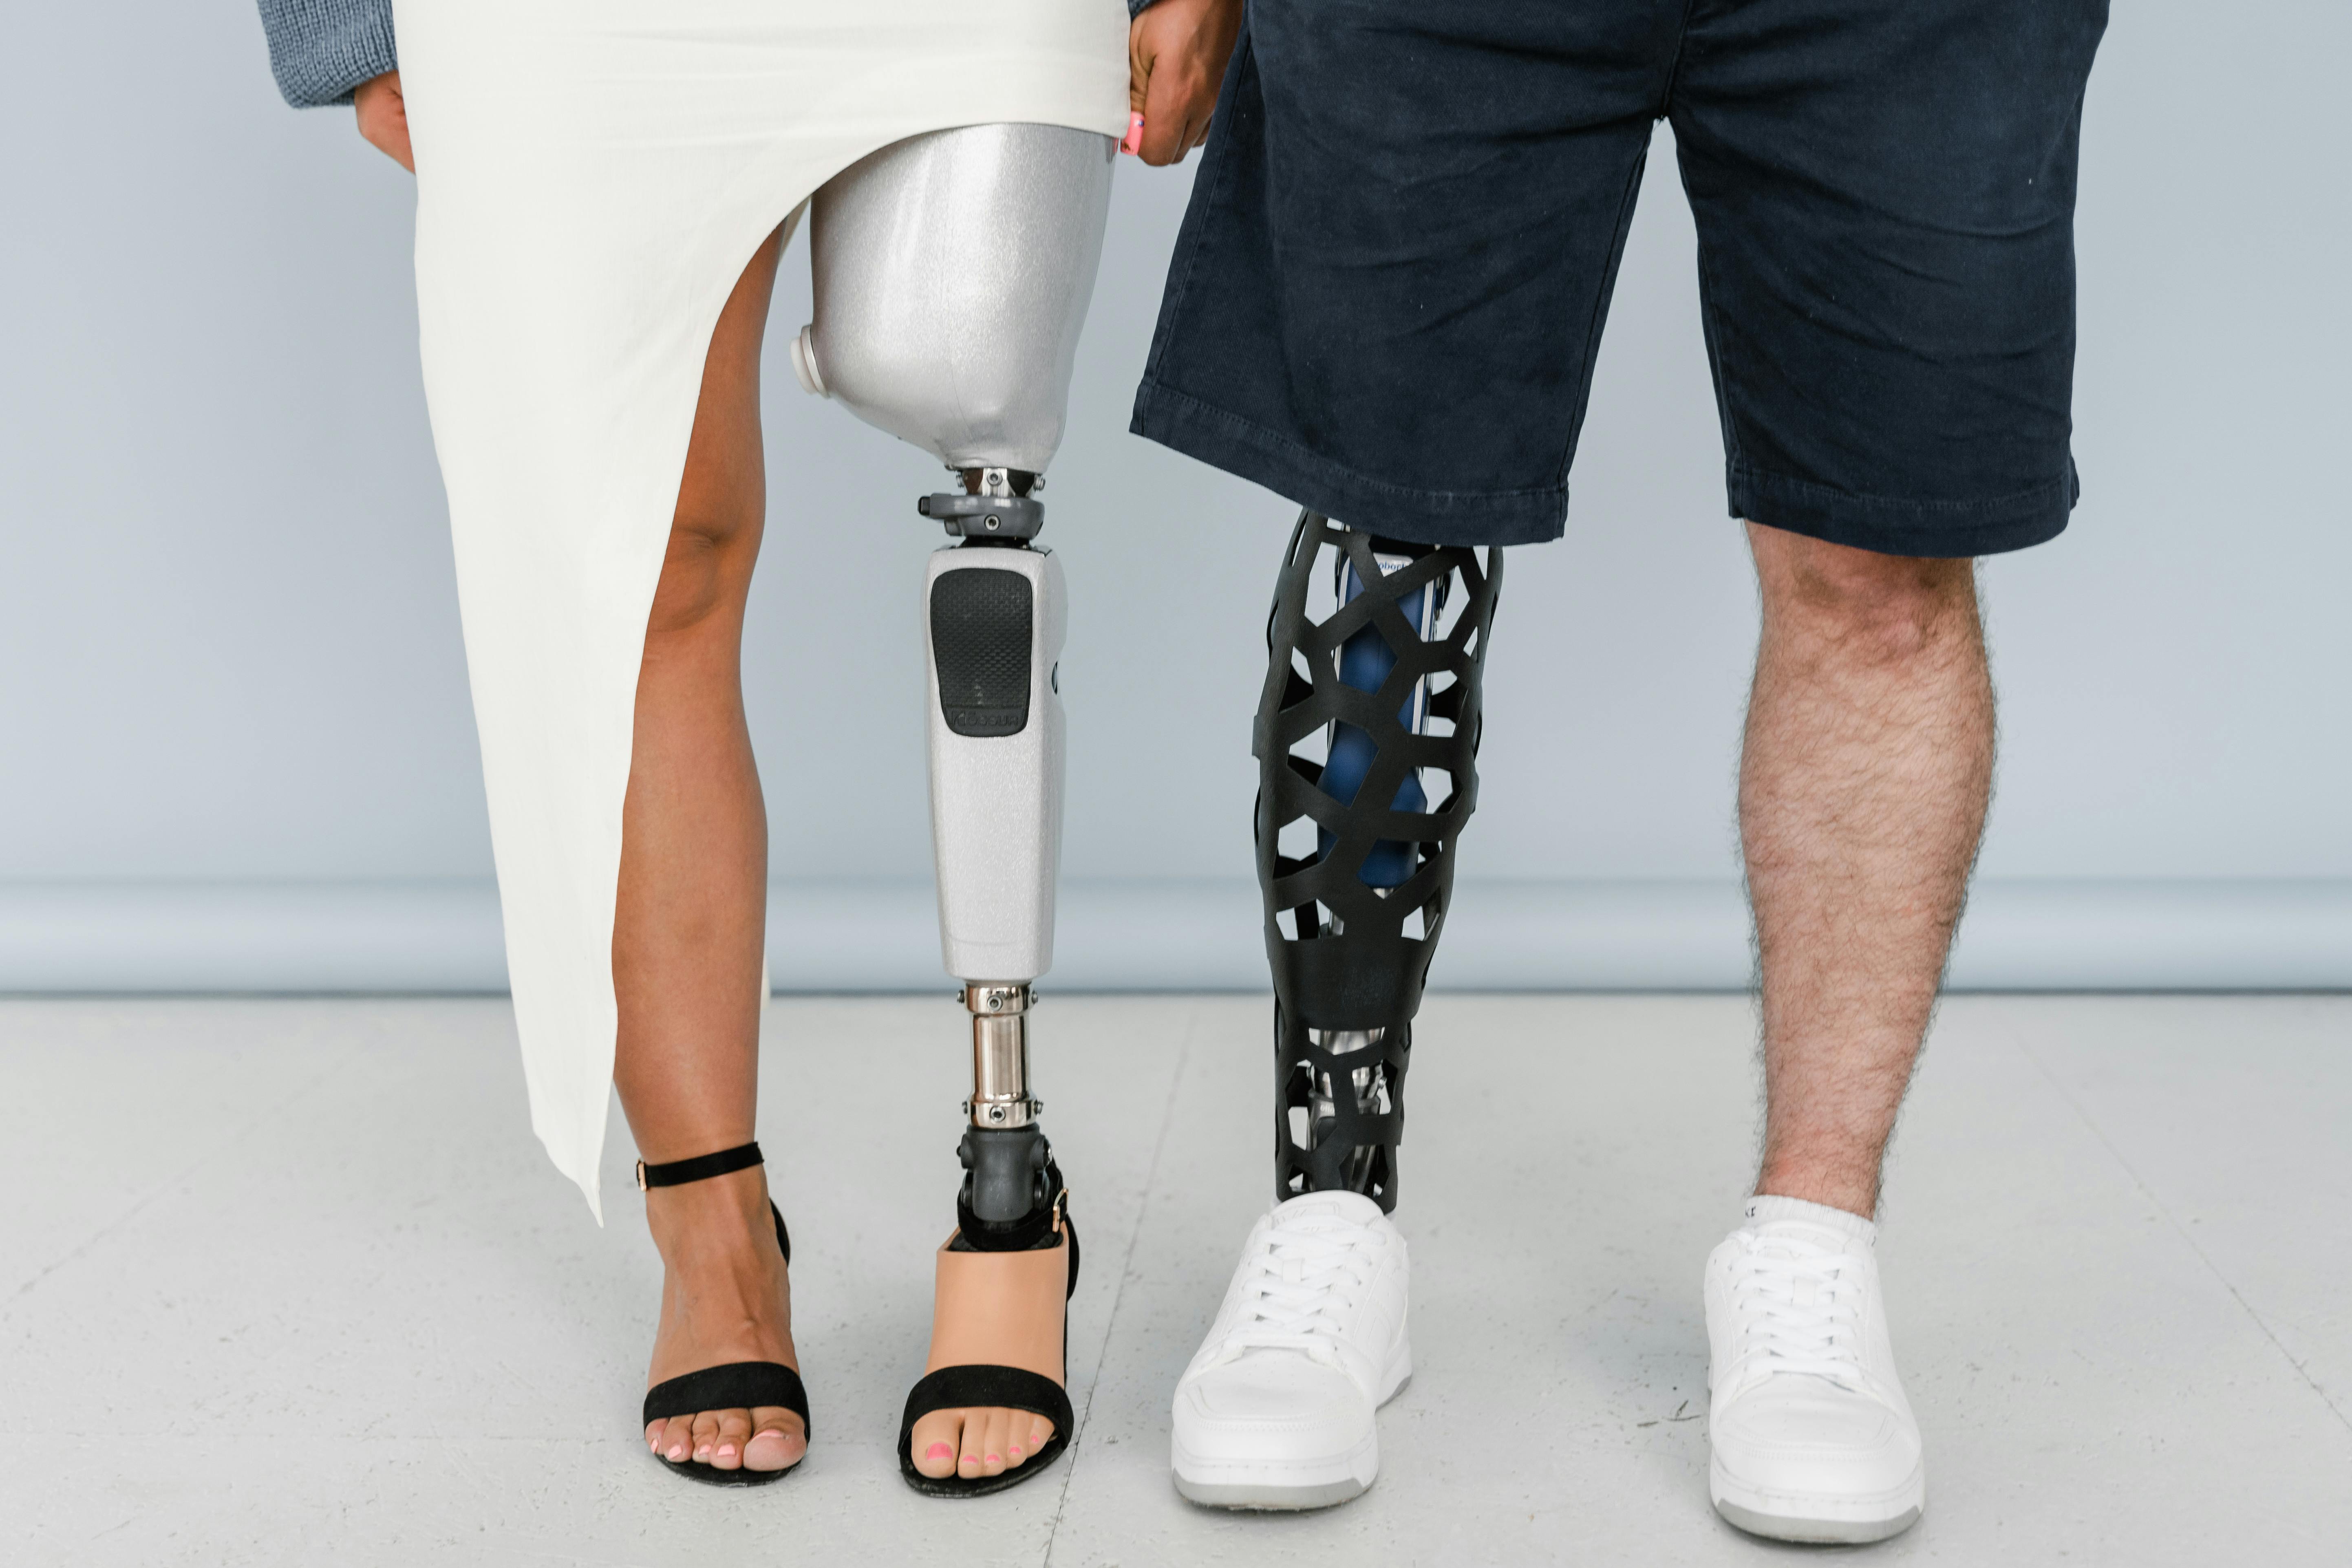 A Man and a Woman with Prosthetic Legs Standing Together · Free